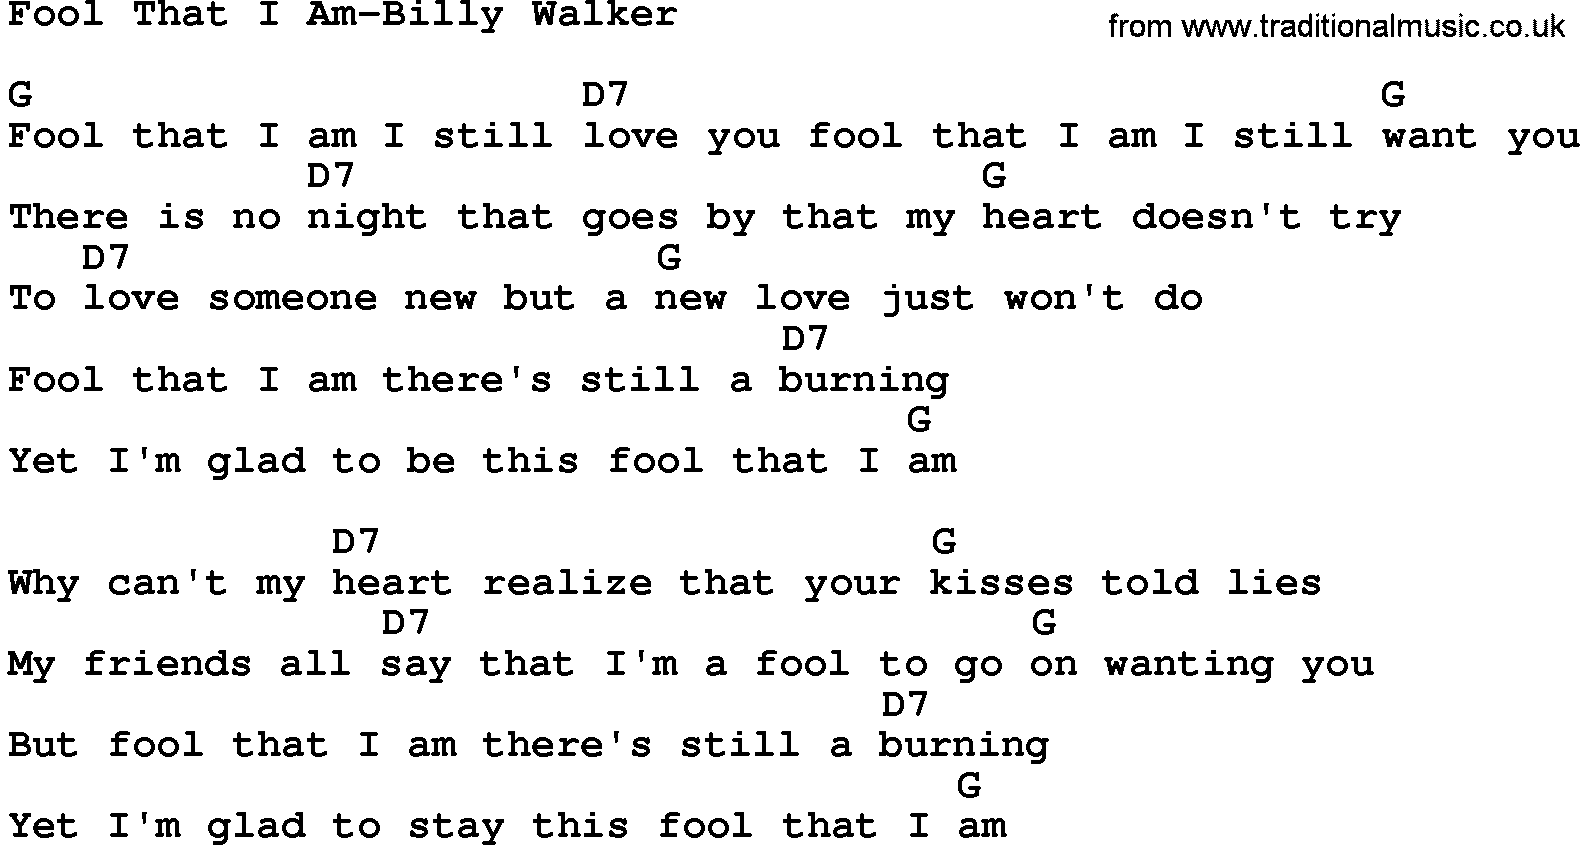 Country Music:Fool That I Am-Billy Walker Lyrics and Chords